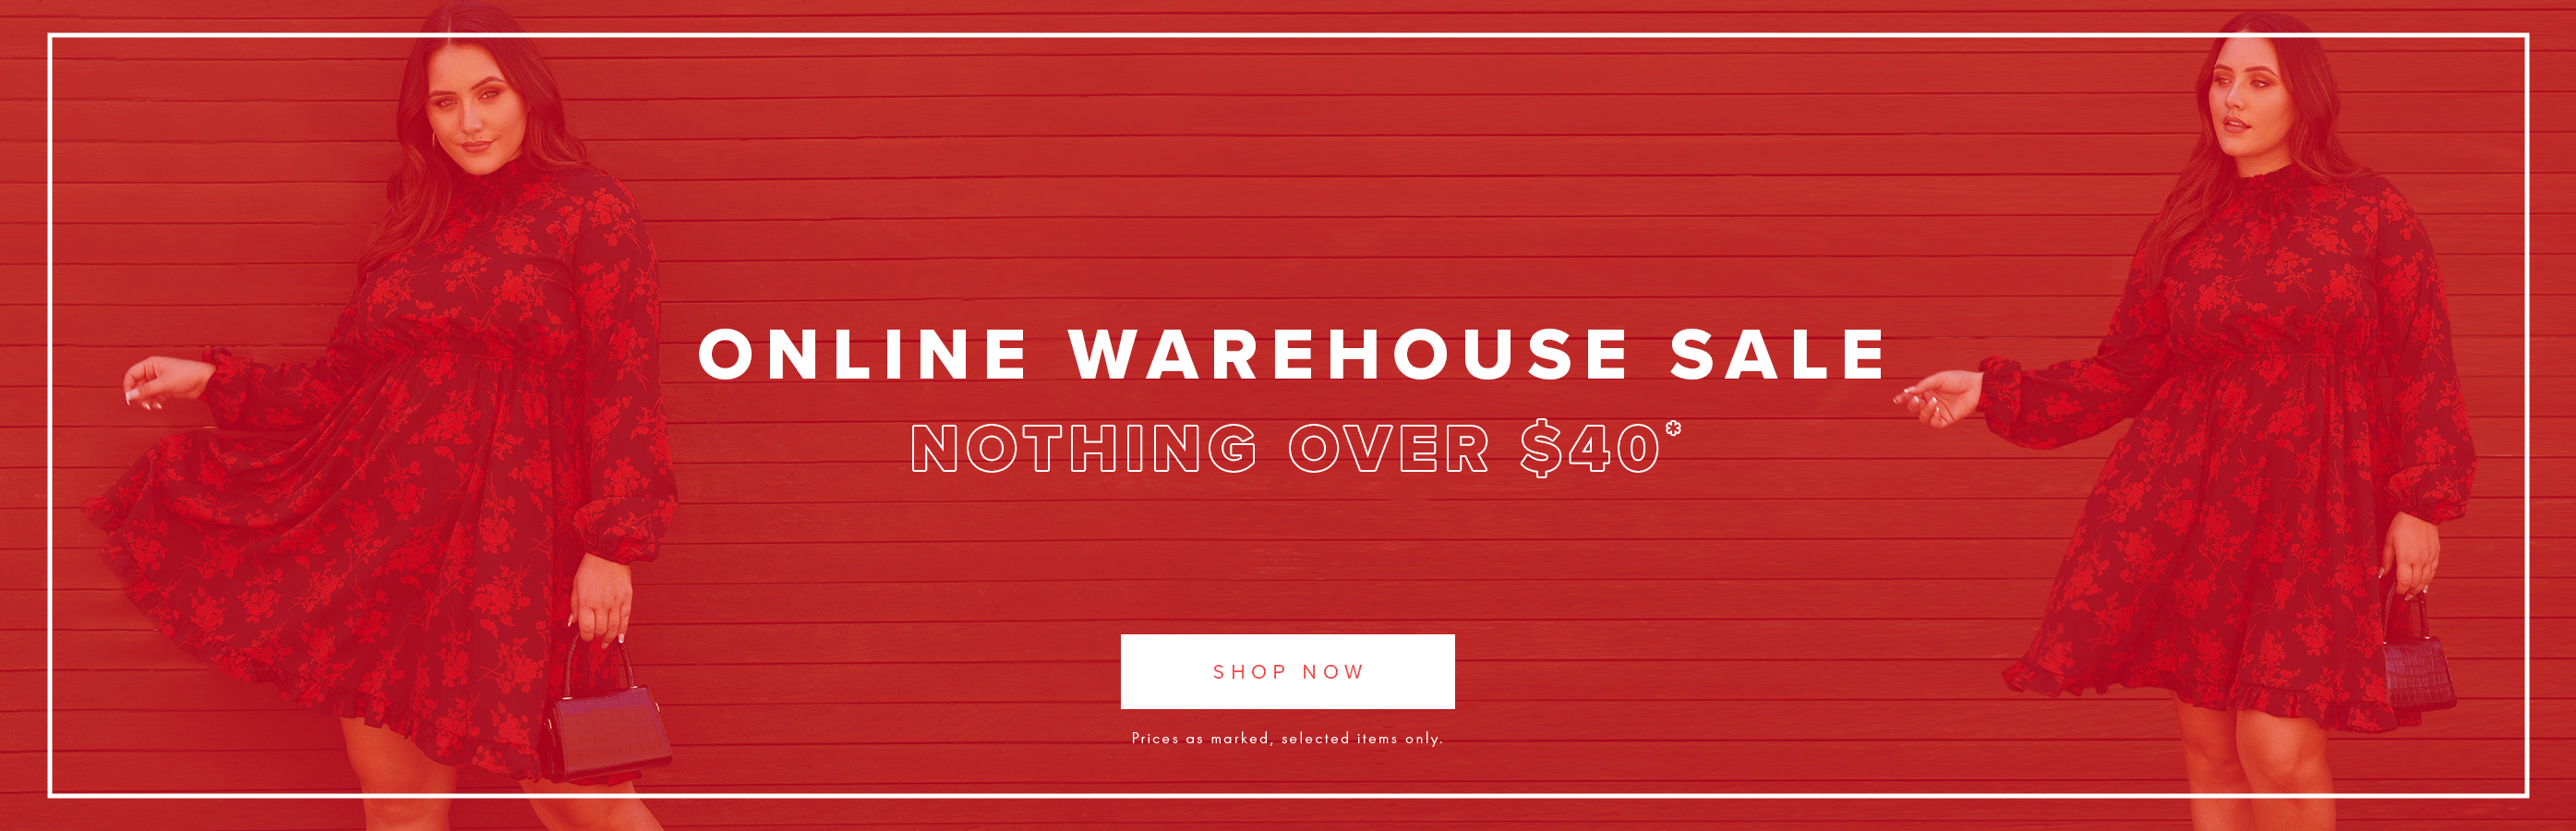 Online Warehouse sale nothing over $40